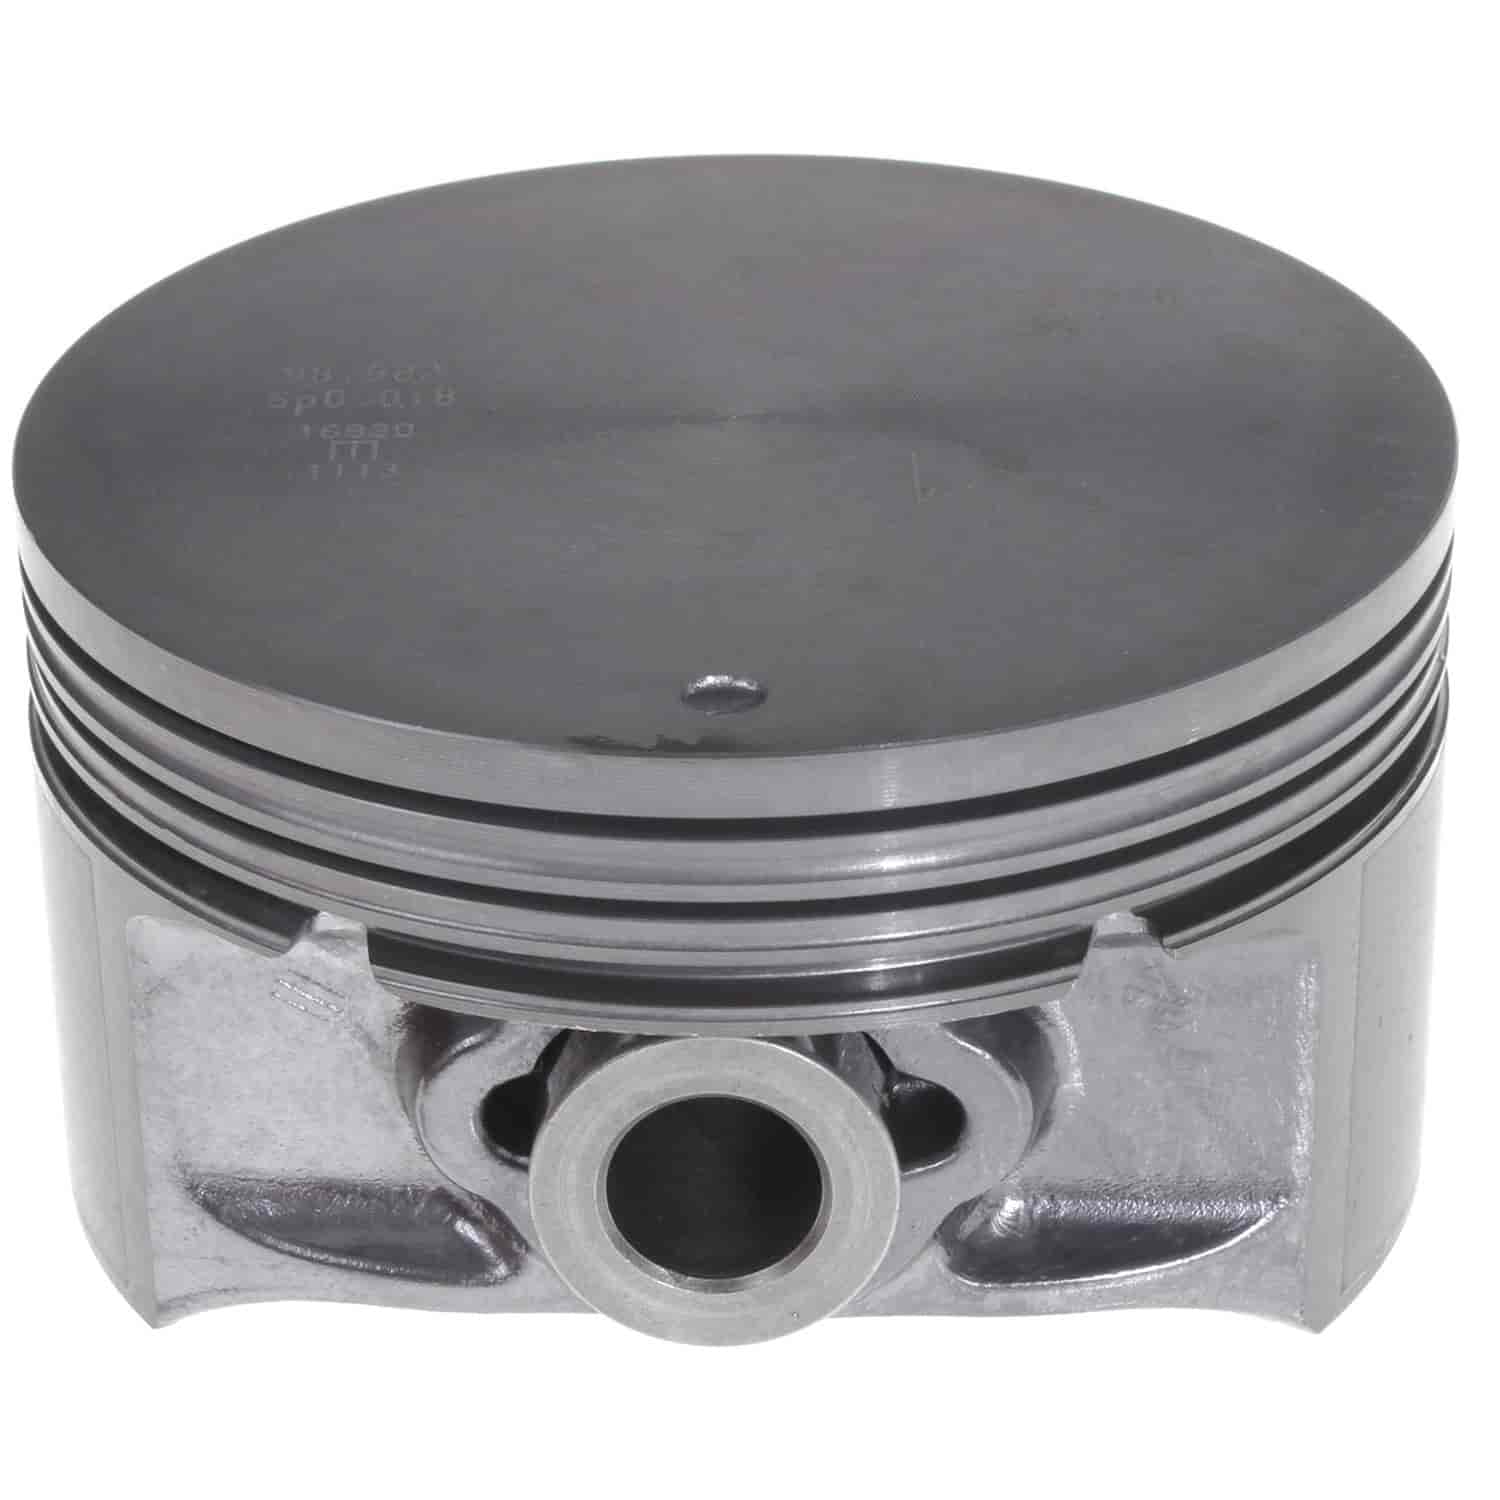 Clevite MAHLE 2243540: Piston Set 1997-2004 Chevy LS V8 5.7L (LS1) with  3.898"/99mm Bore (Standard) - JEGS